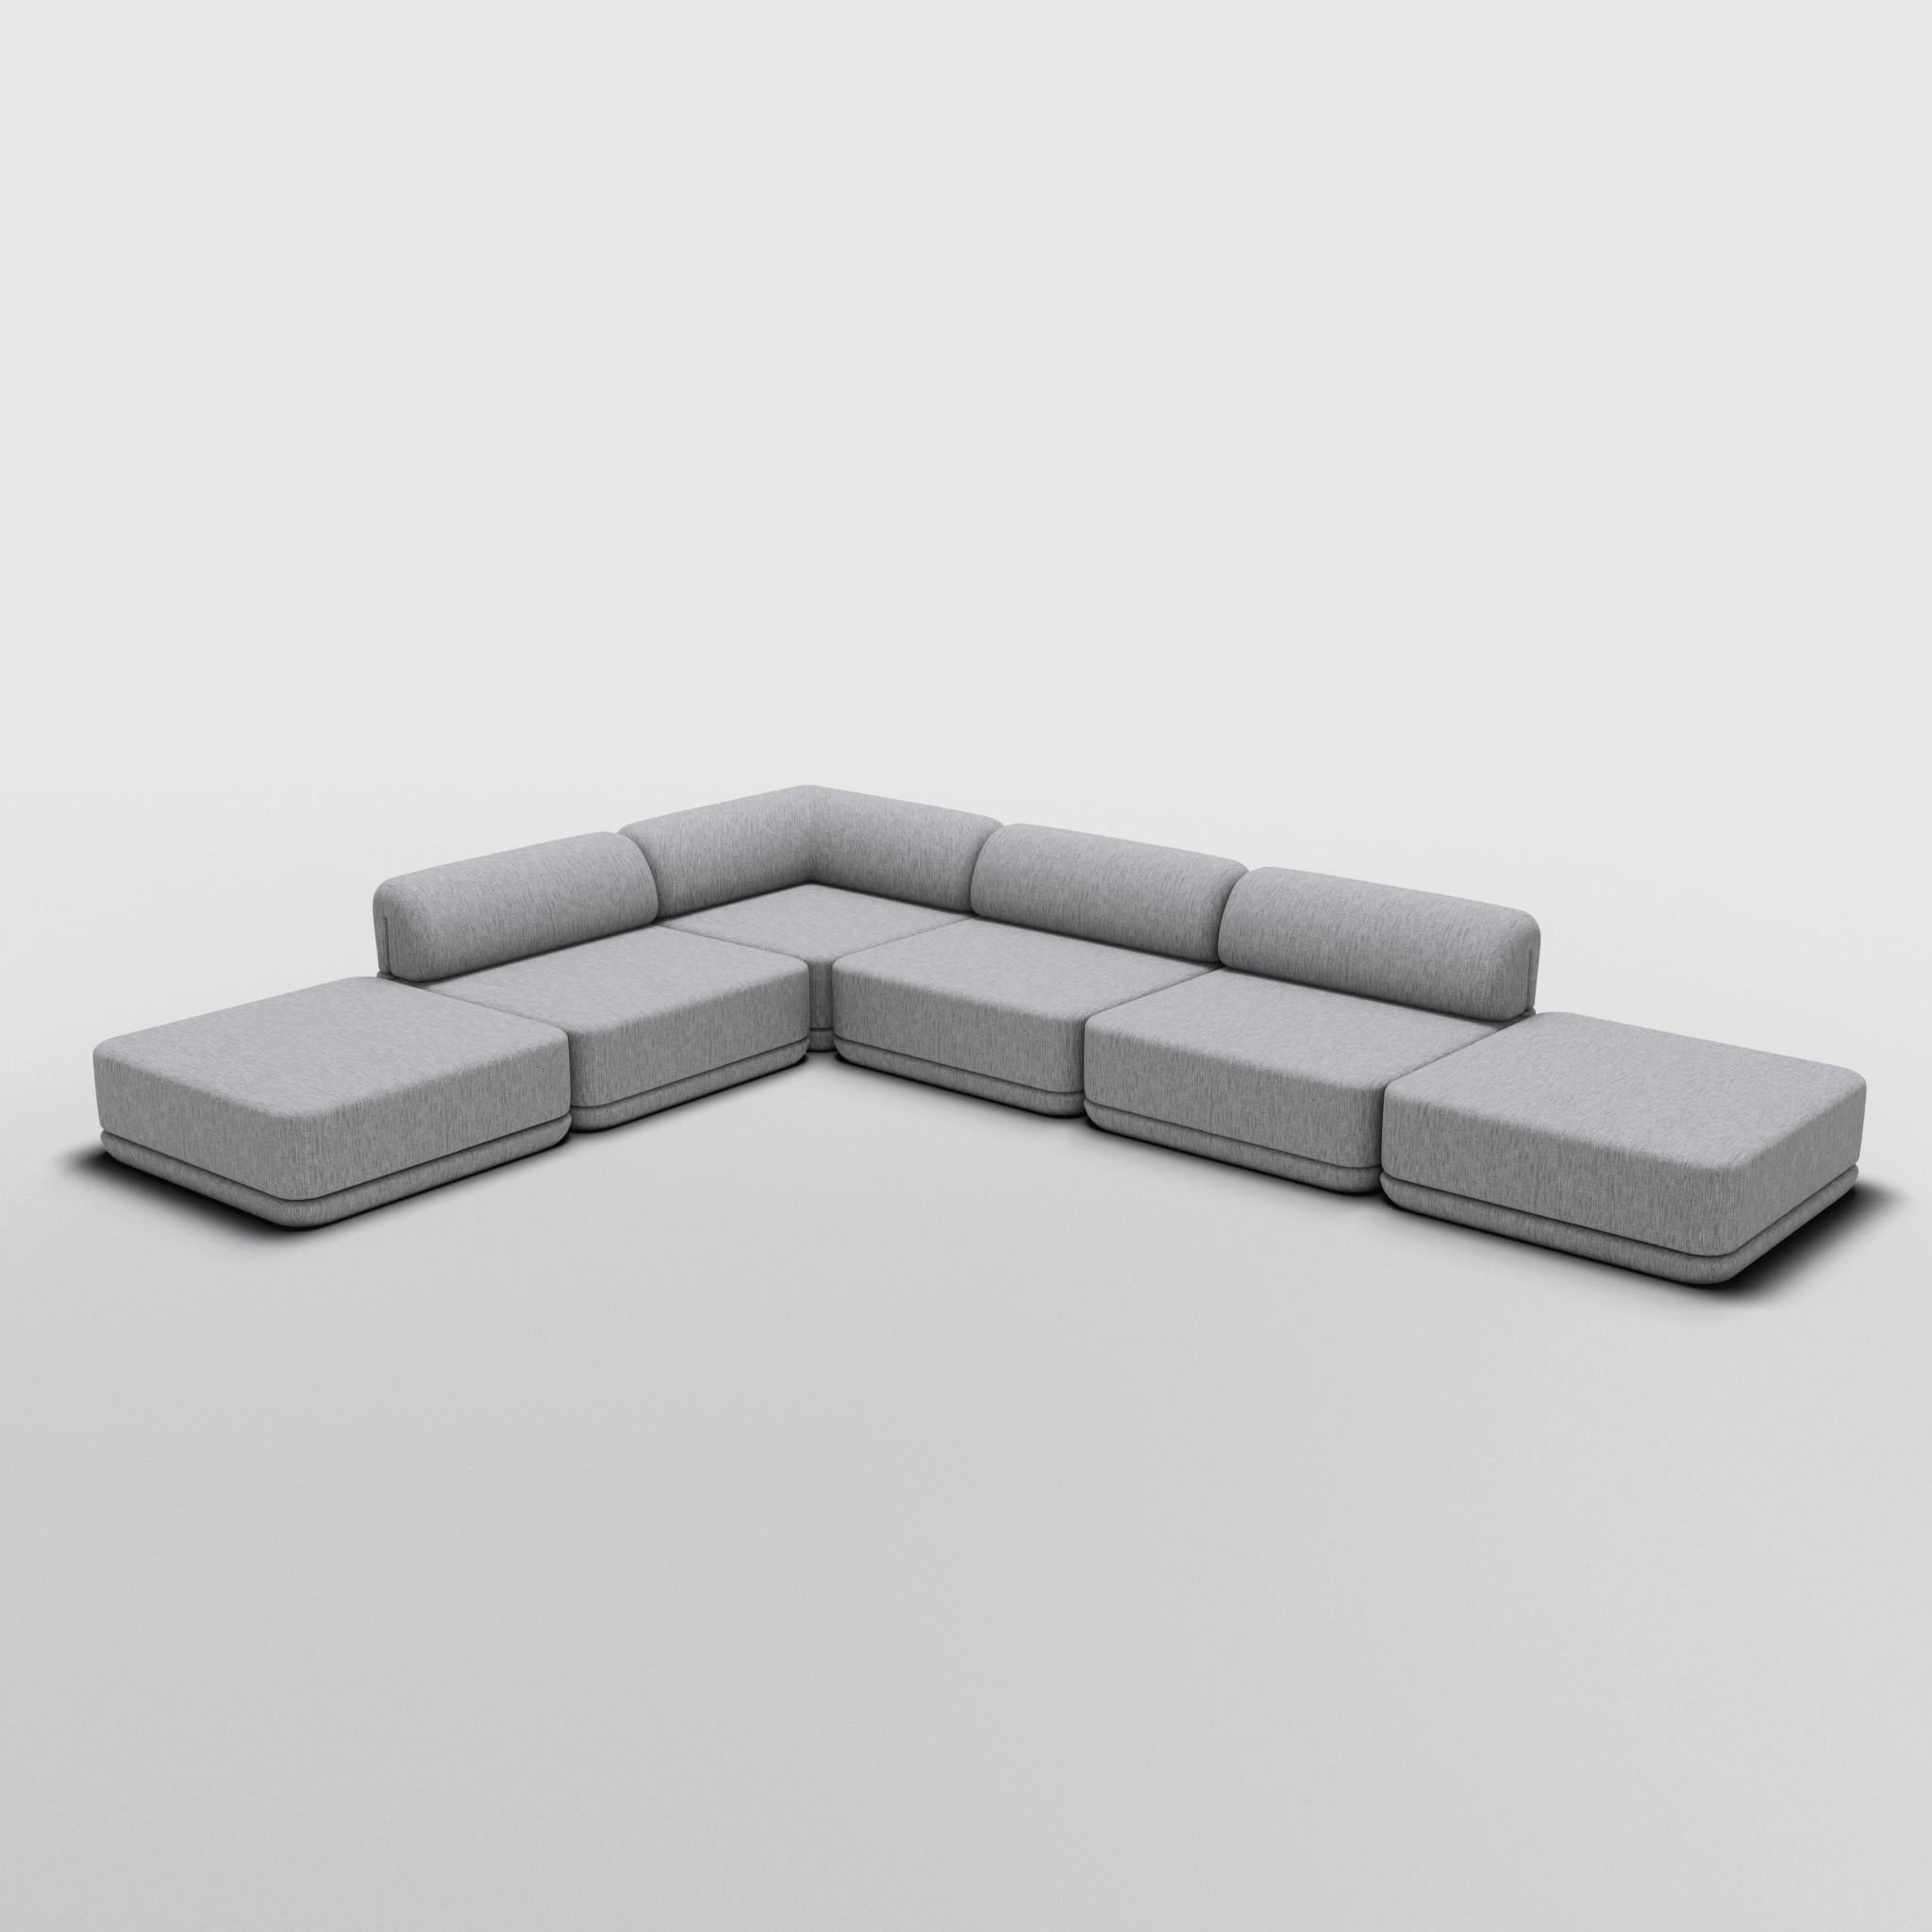 The Cube Sofa - Corner Lounge Ottoman Mix Sectional For Sale 2